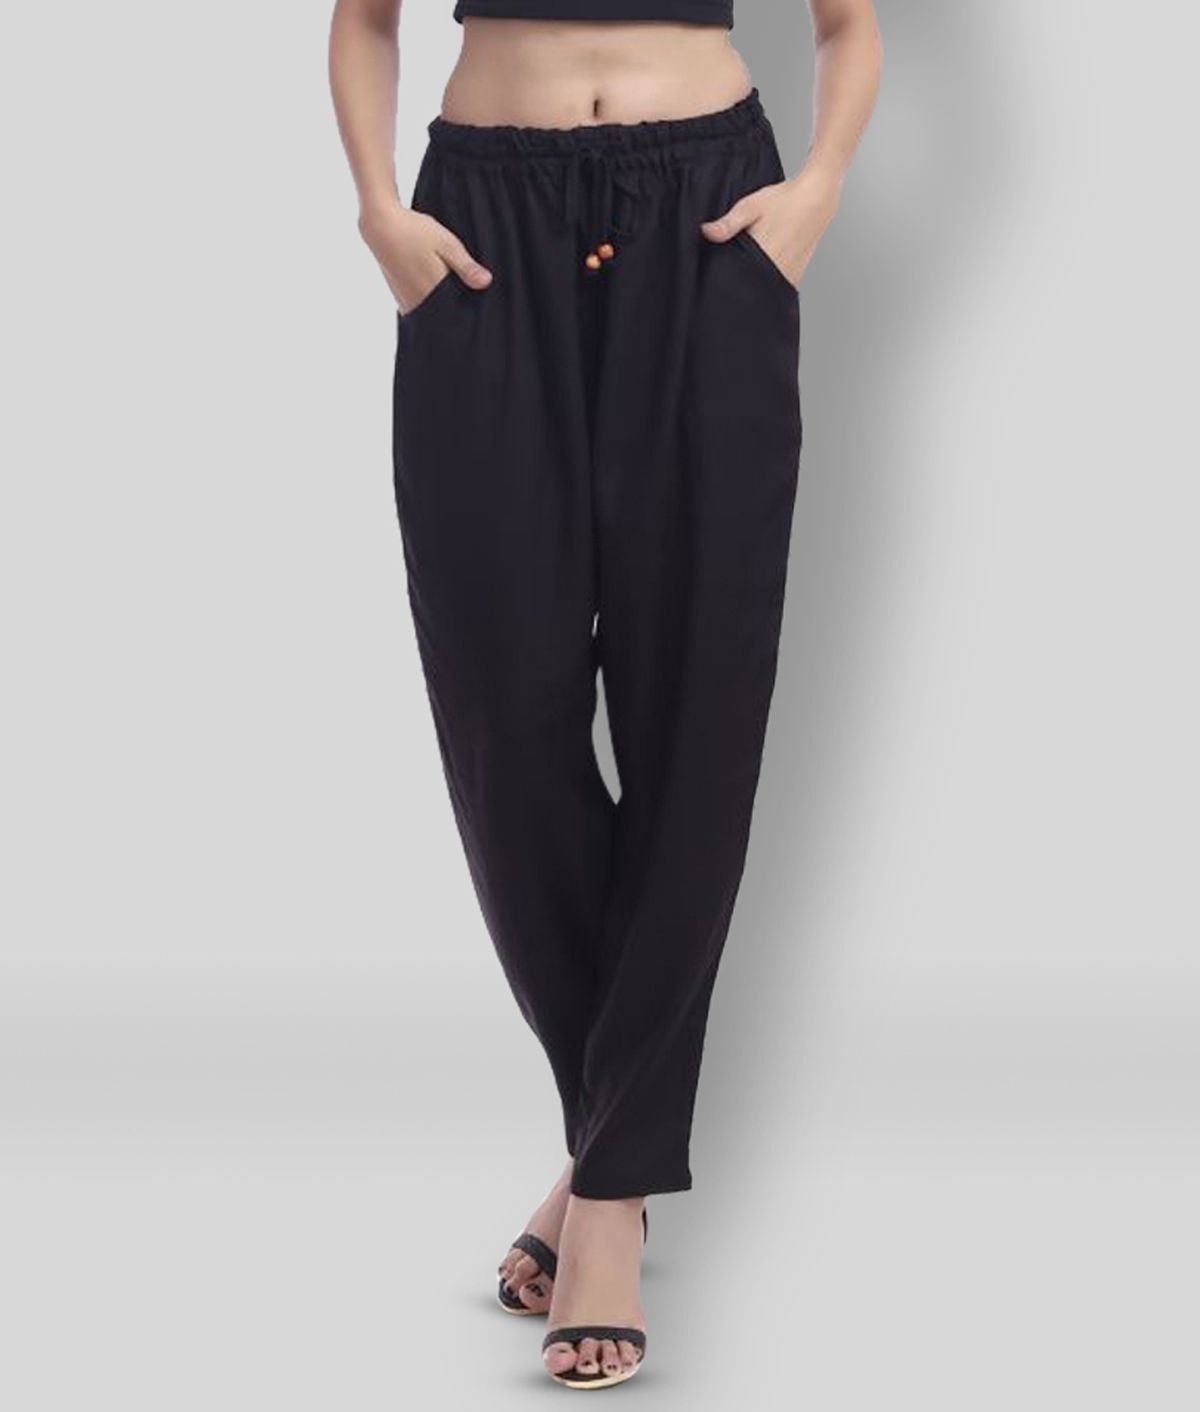     			Lee Moda - Black Rayon Loose Fit Women's Casual Pants  ( Pack of 1 )